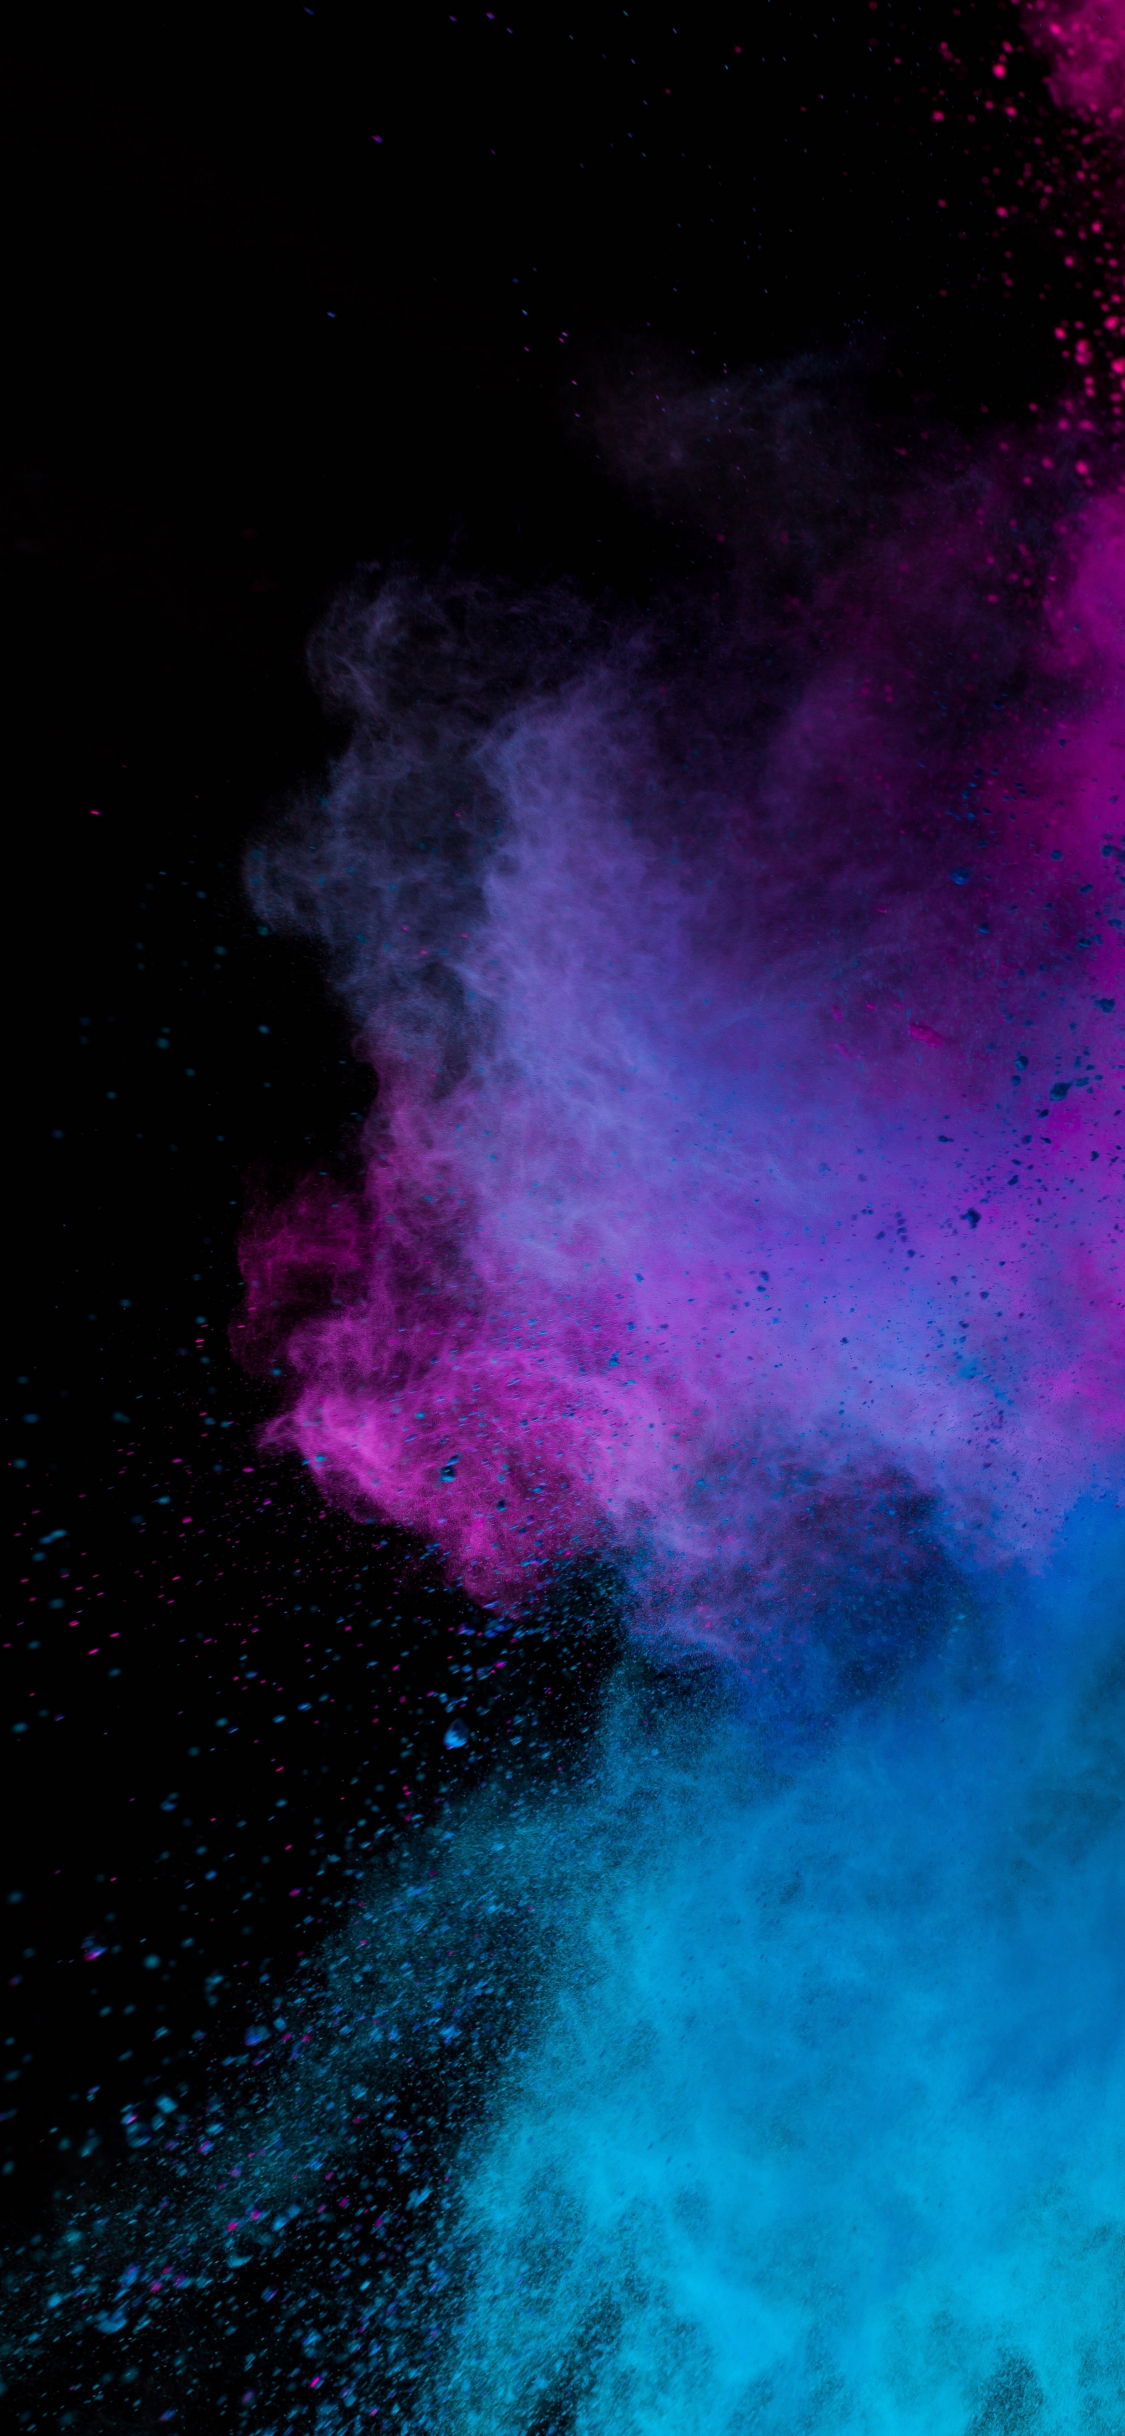 Download wallpaper 1125x2436 dusk, powder, paint, holi, multicolored,  iphone x, 1125x2436 hd background, 20608